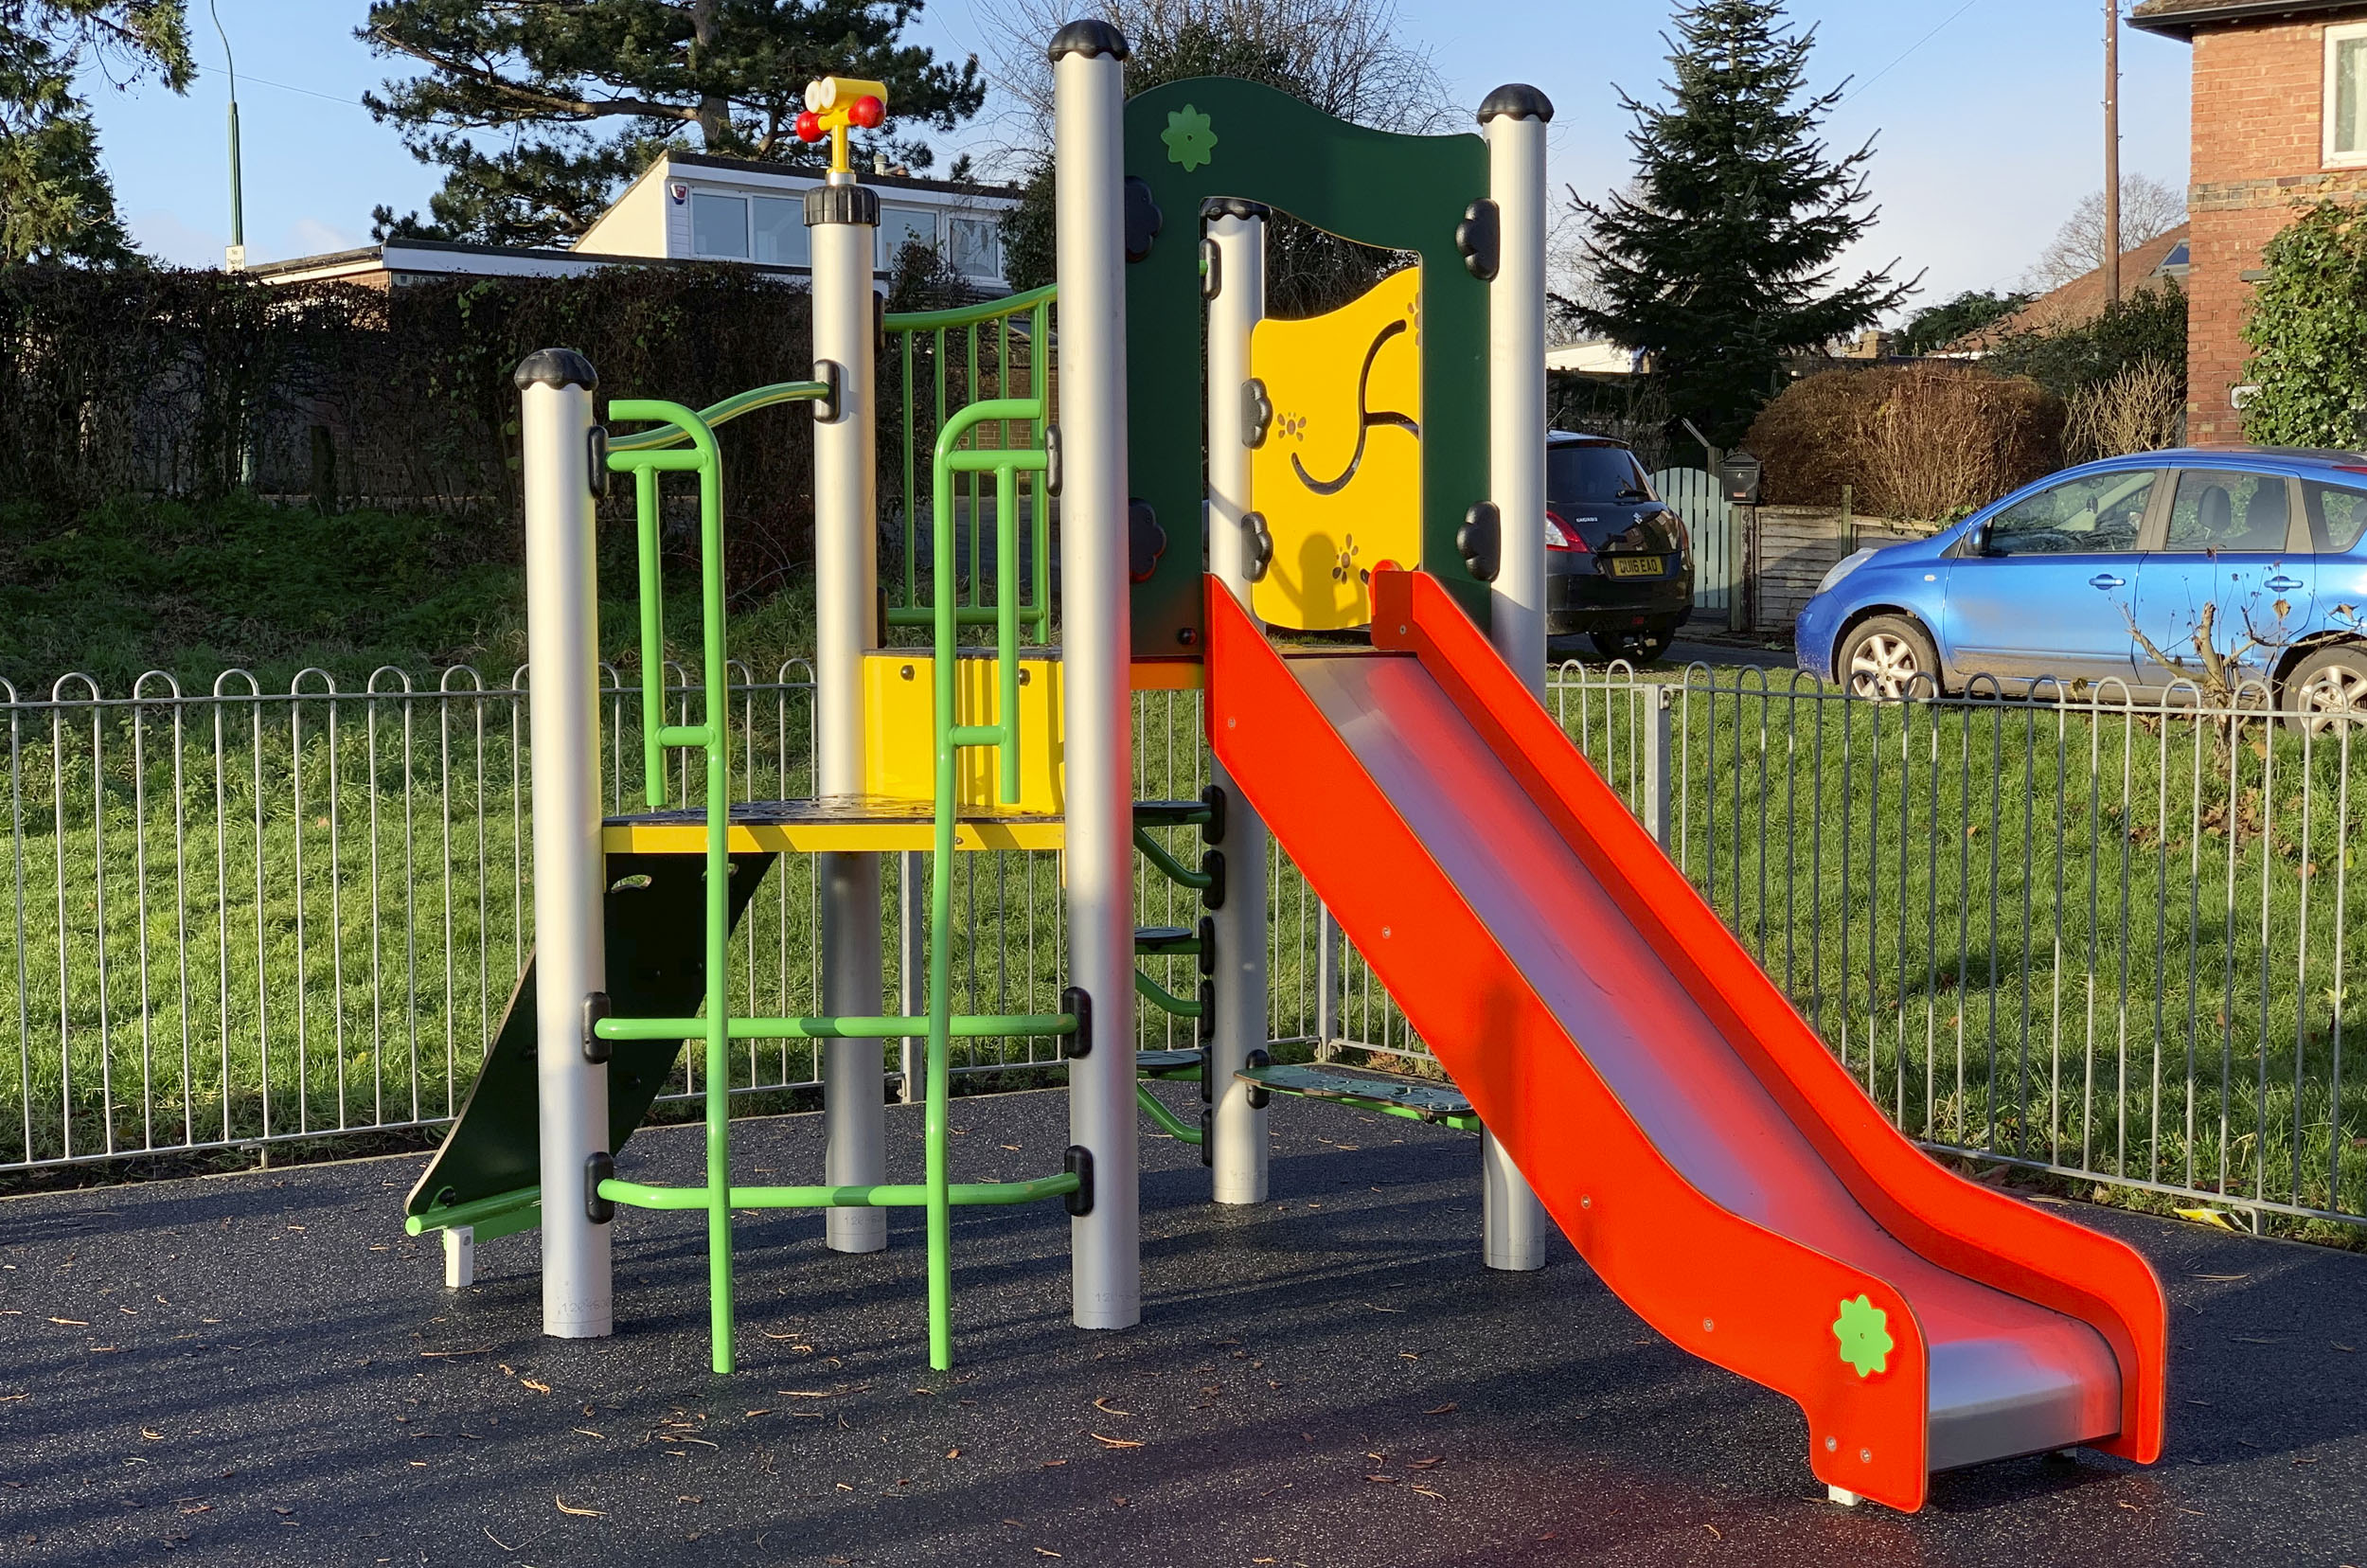 Spider Multiplay, green and orange ramp, green Ladd, red slide, yellow play panels